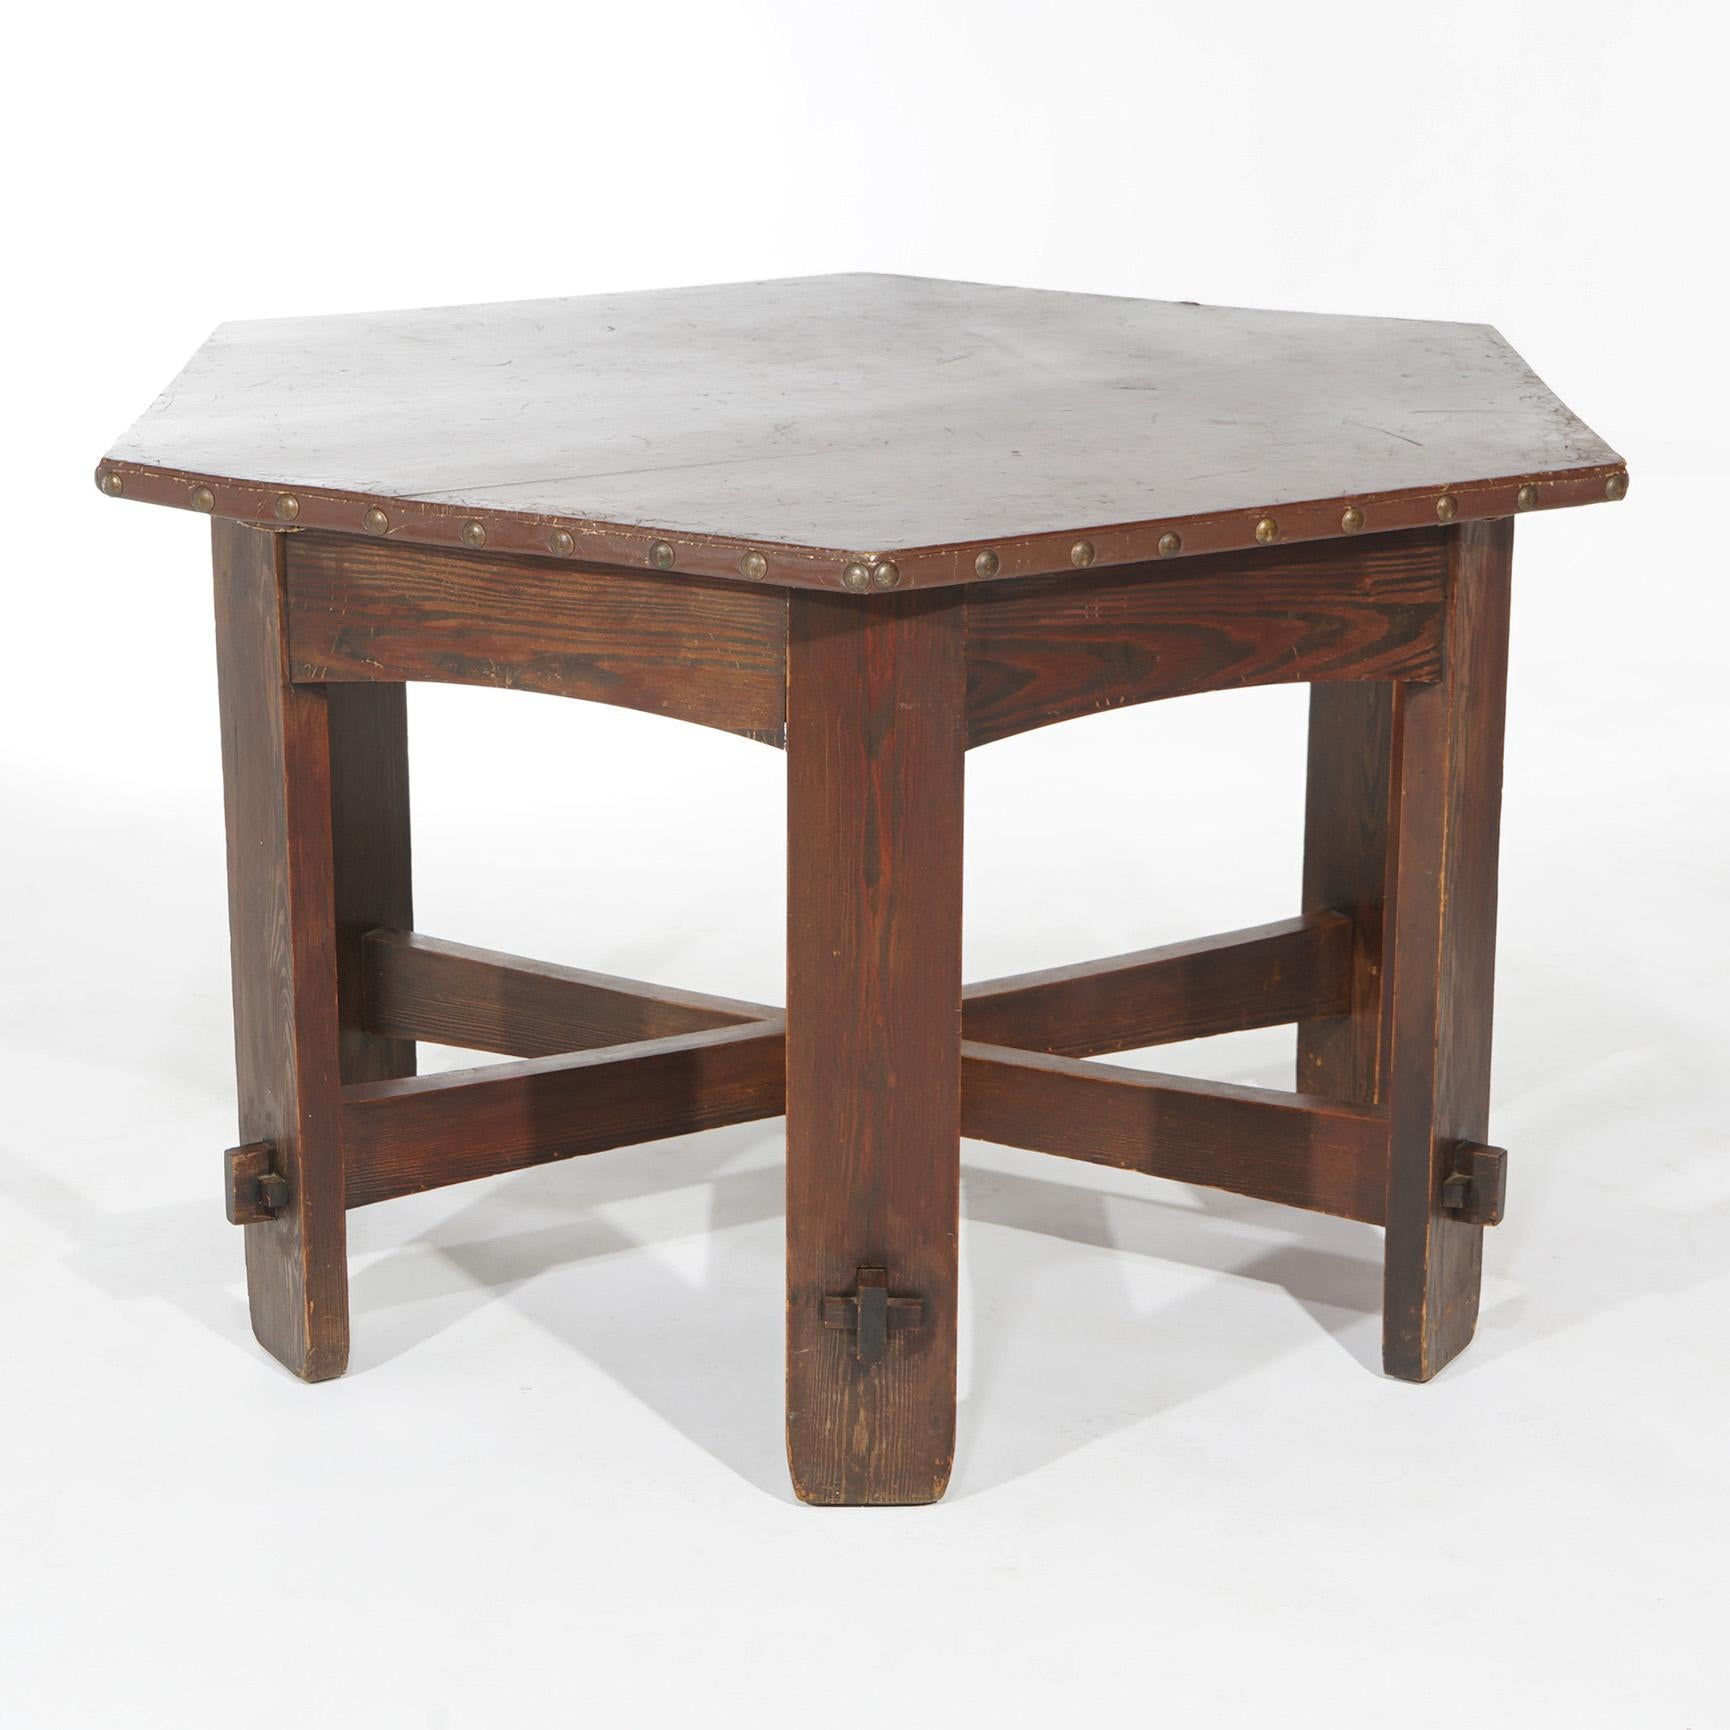 An antique Arts & Crafts L&JG Stickley Onondaga Shop dining table offers chestnut construction with octagonal leather covered top over mortise and tenon base, circa 1910

Measures - 30.5